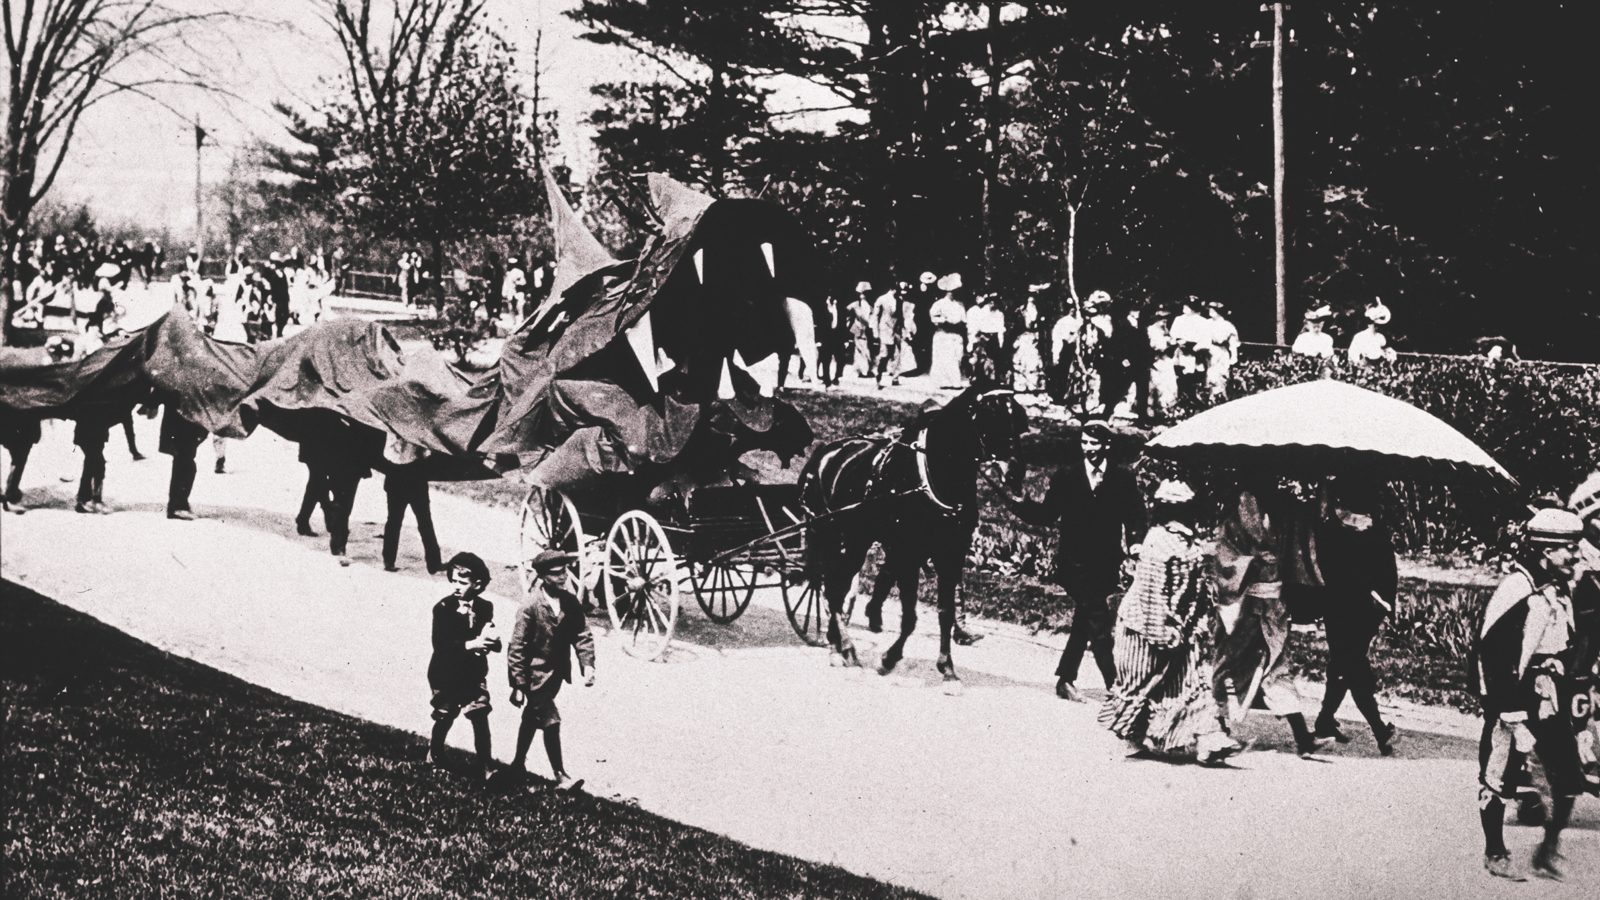 A toothy dragon, a horse and buggy, and children in knickers are shown in this view from the early 1900s.